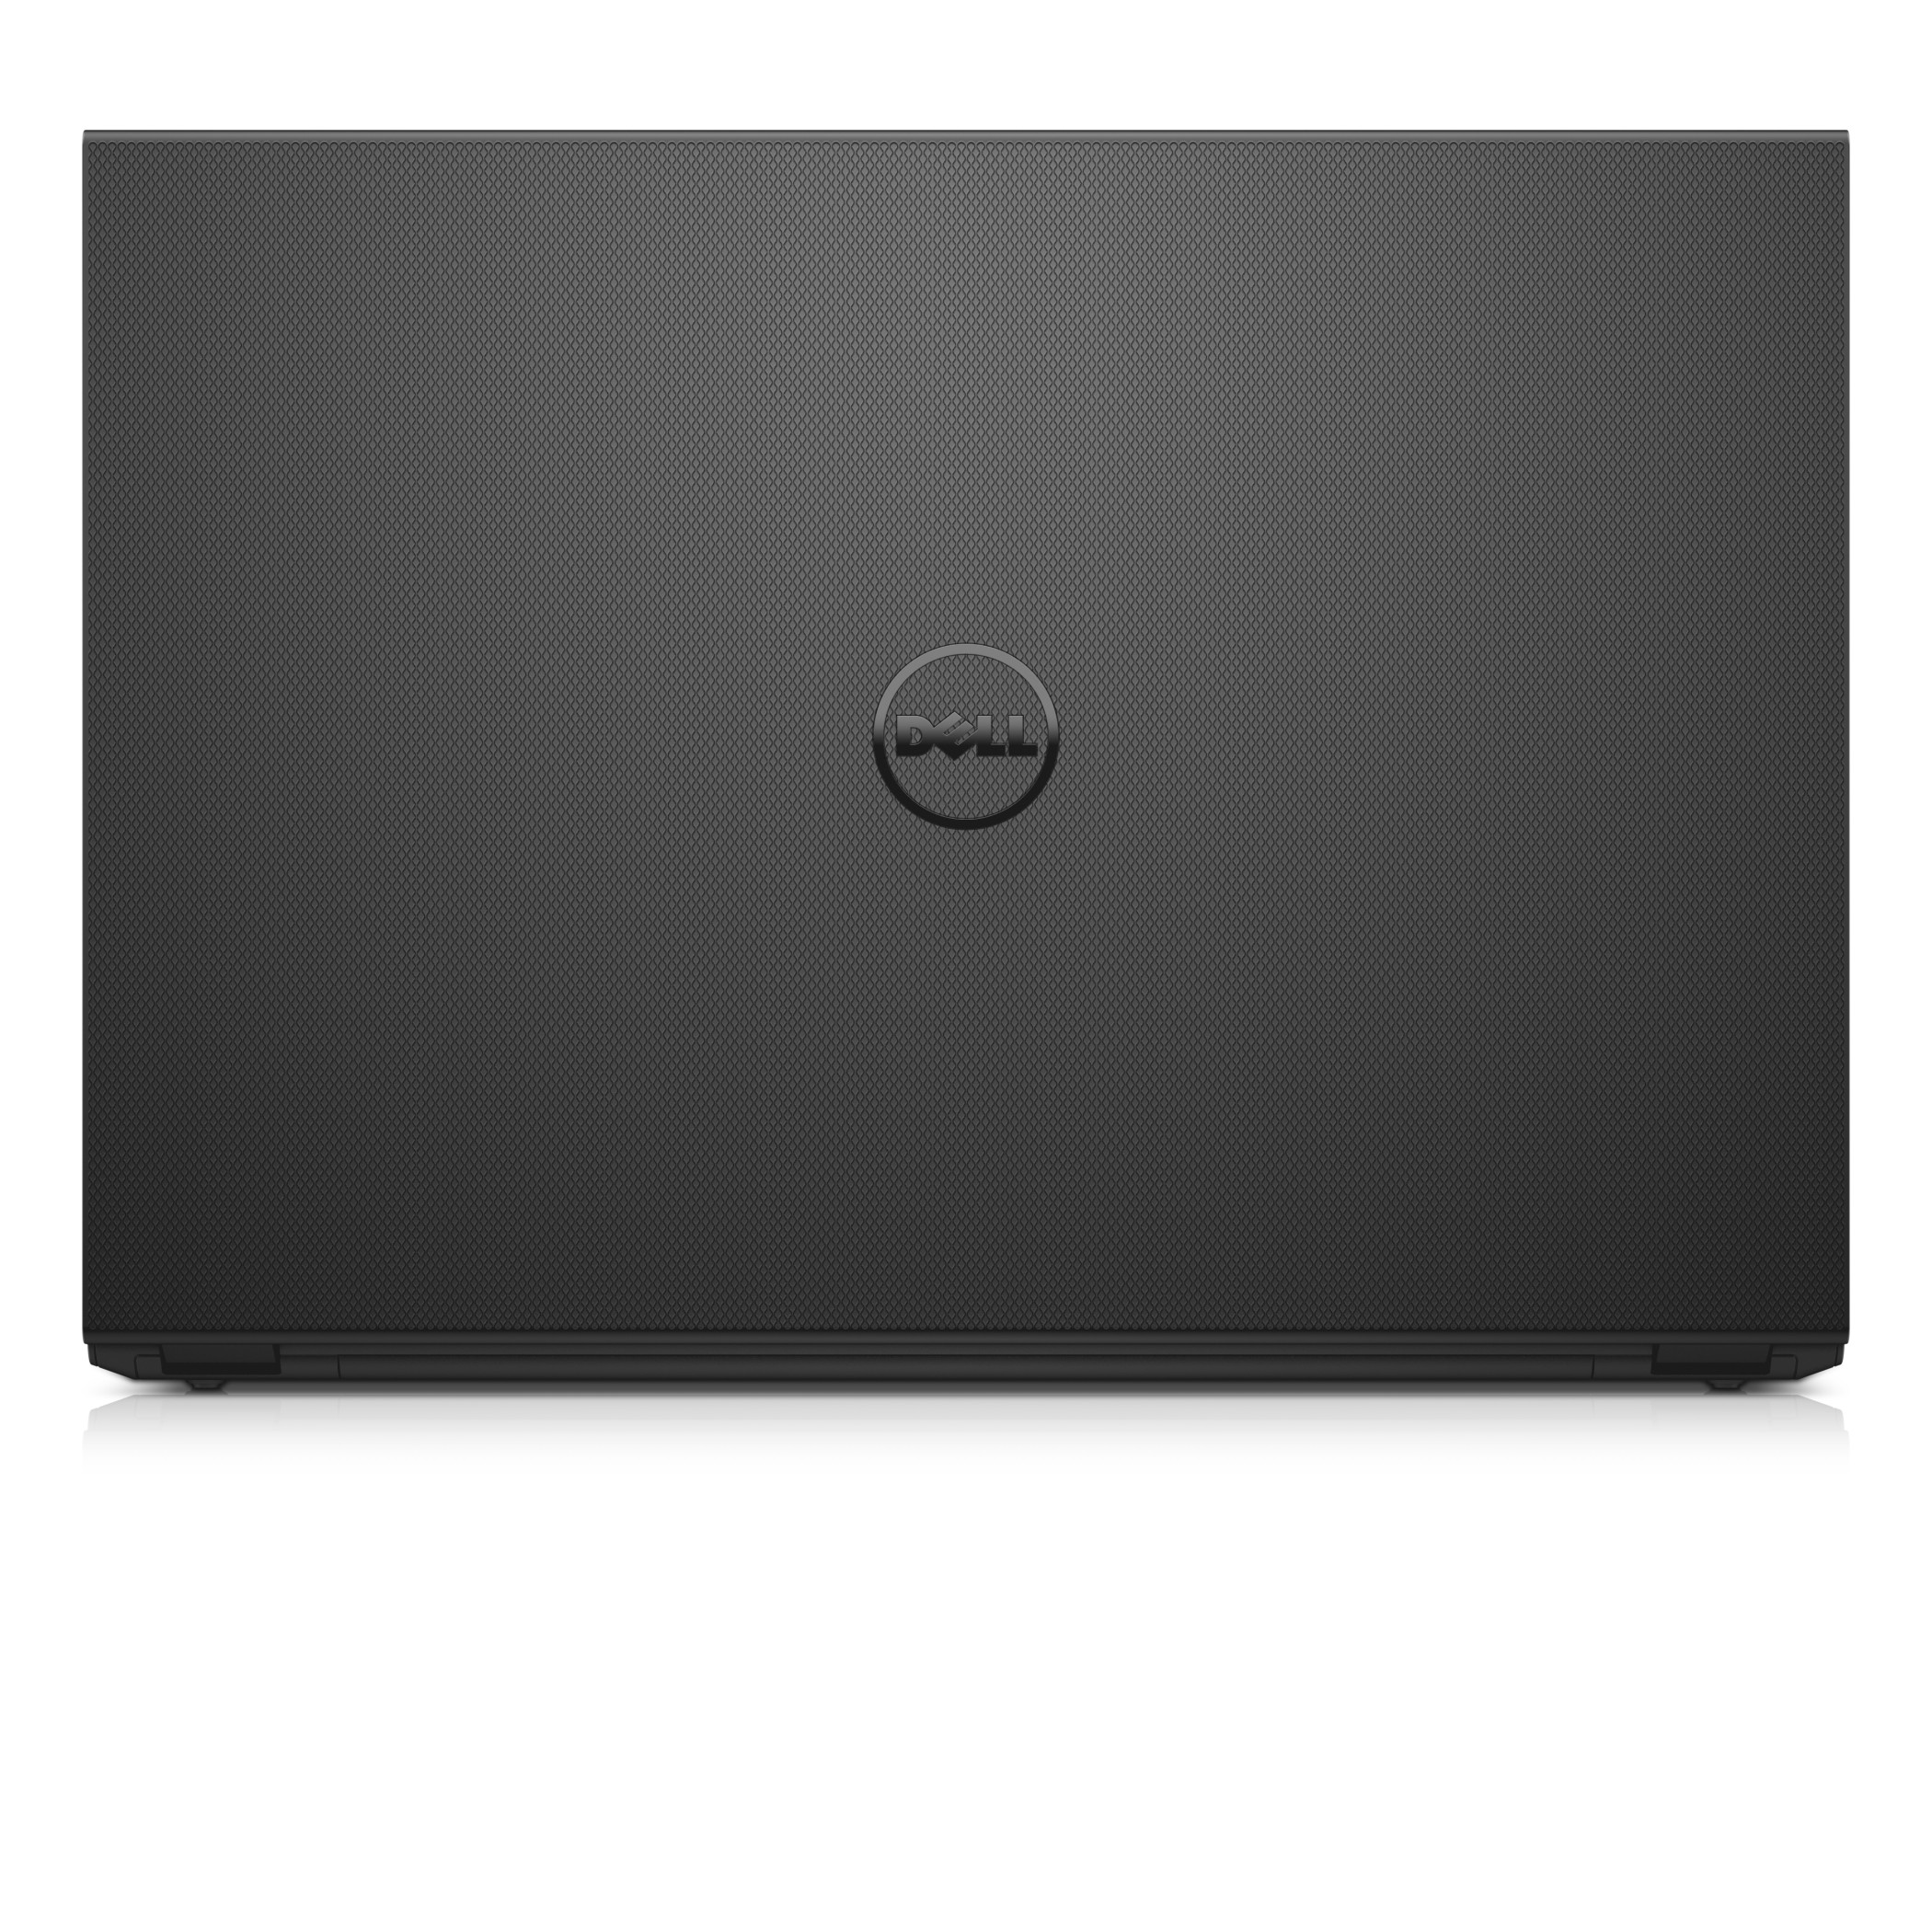 Dell Inspiron 15 3000 Series Non-Touch (Model 3543) notebook computer, with Broadwell processor.